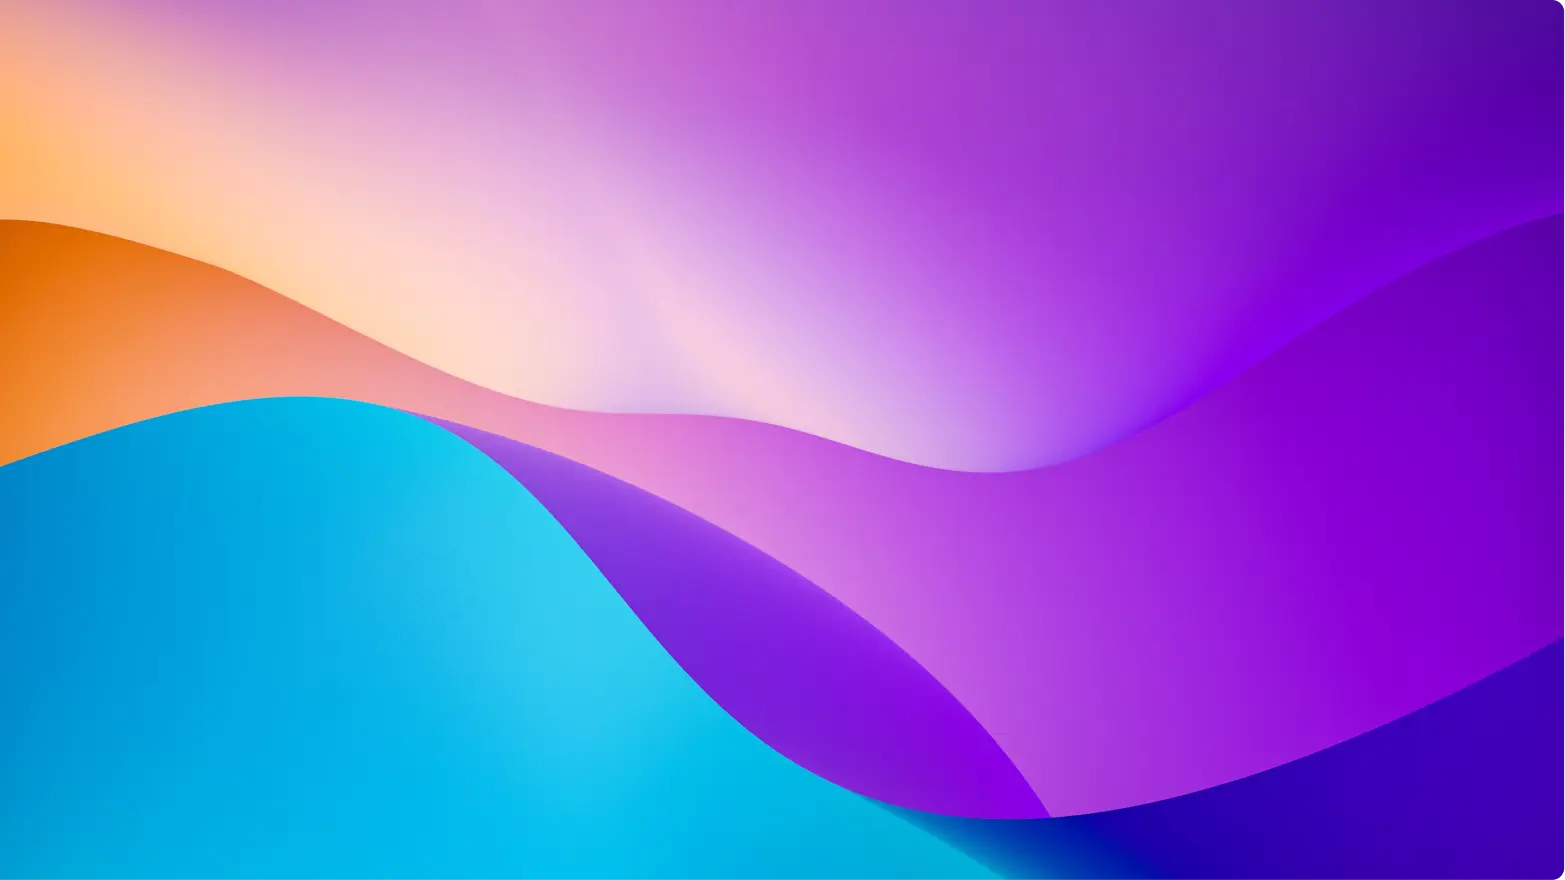 Blue, orange and yellow gradient waves abstract image. 